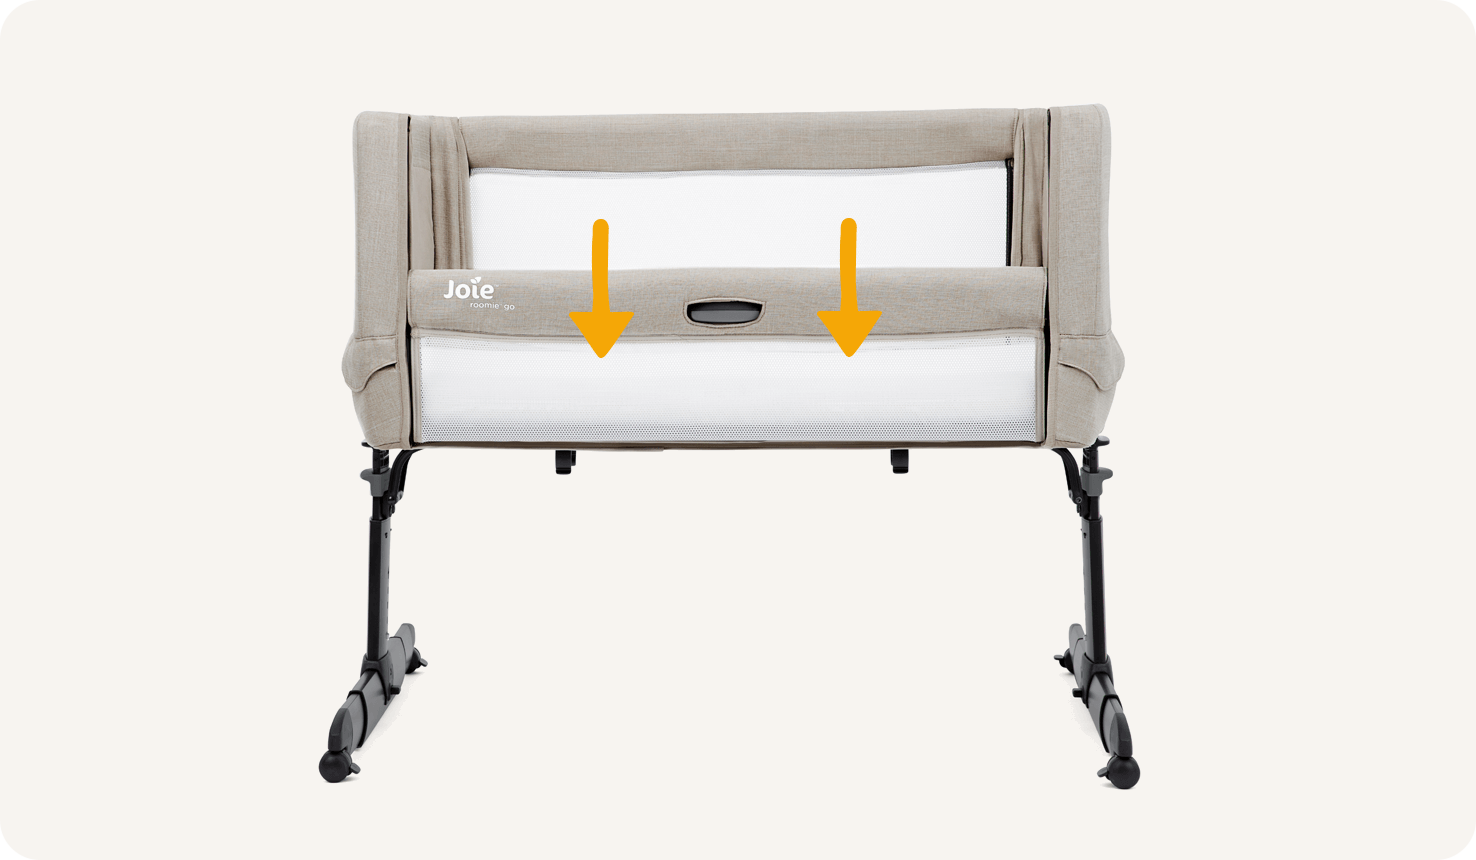 Straight on view of the Joie Roomie Go bedside crib with lift and lower side panel down. Two downward orange arrows illustrate the panel lowering.